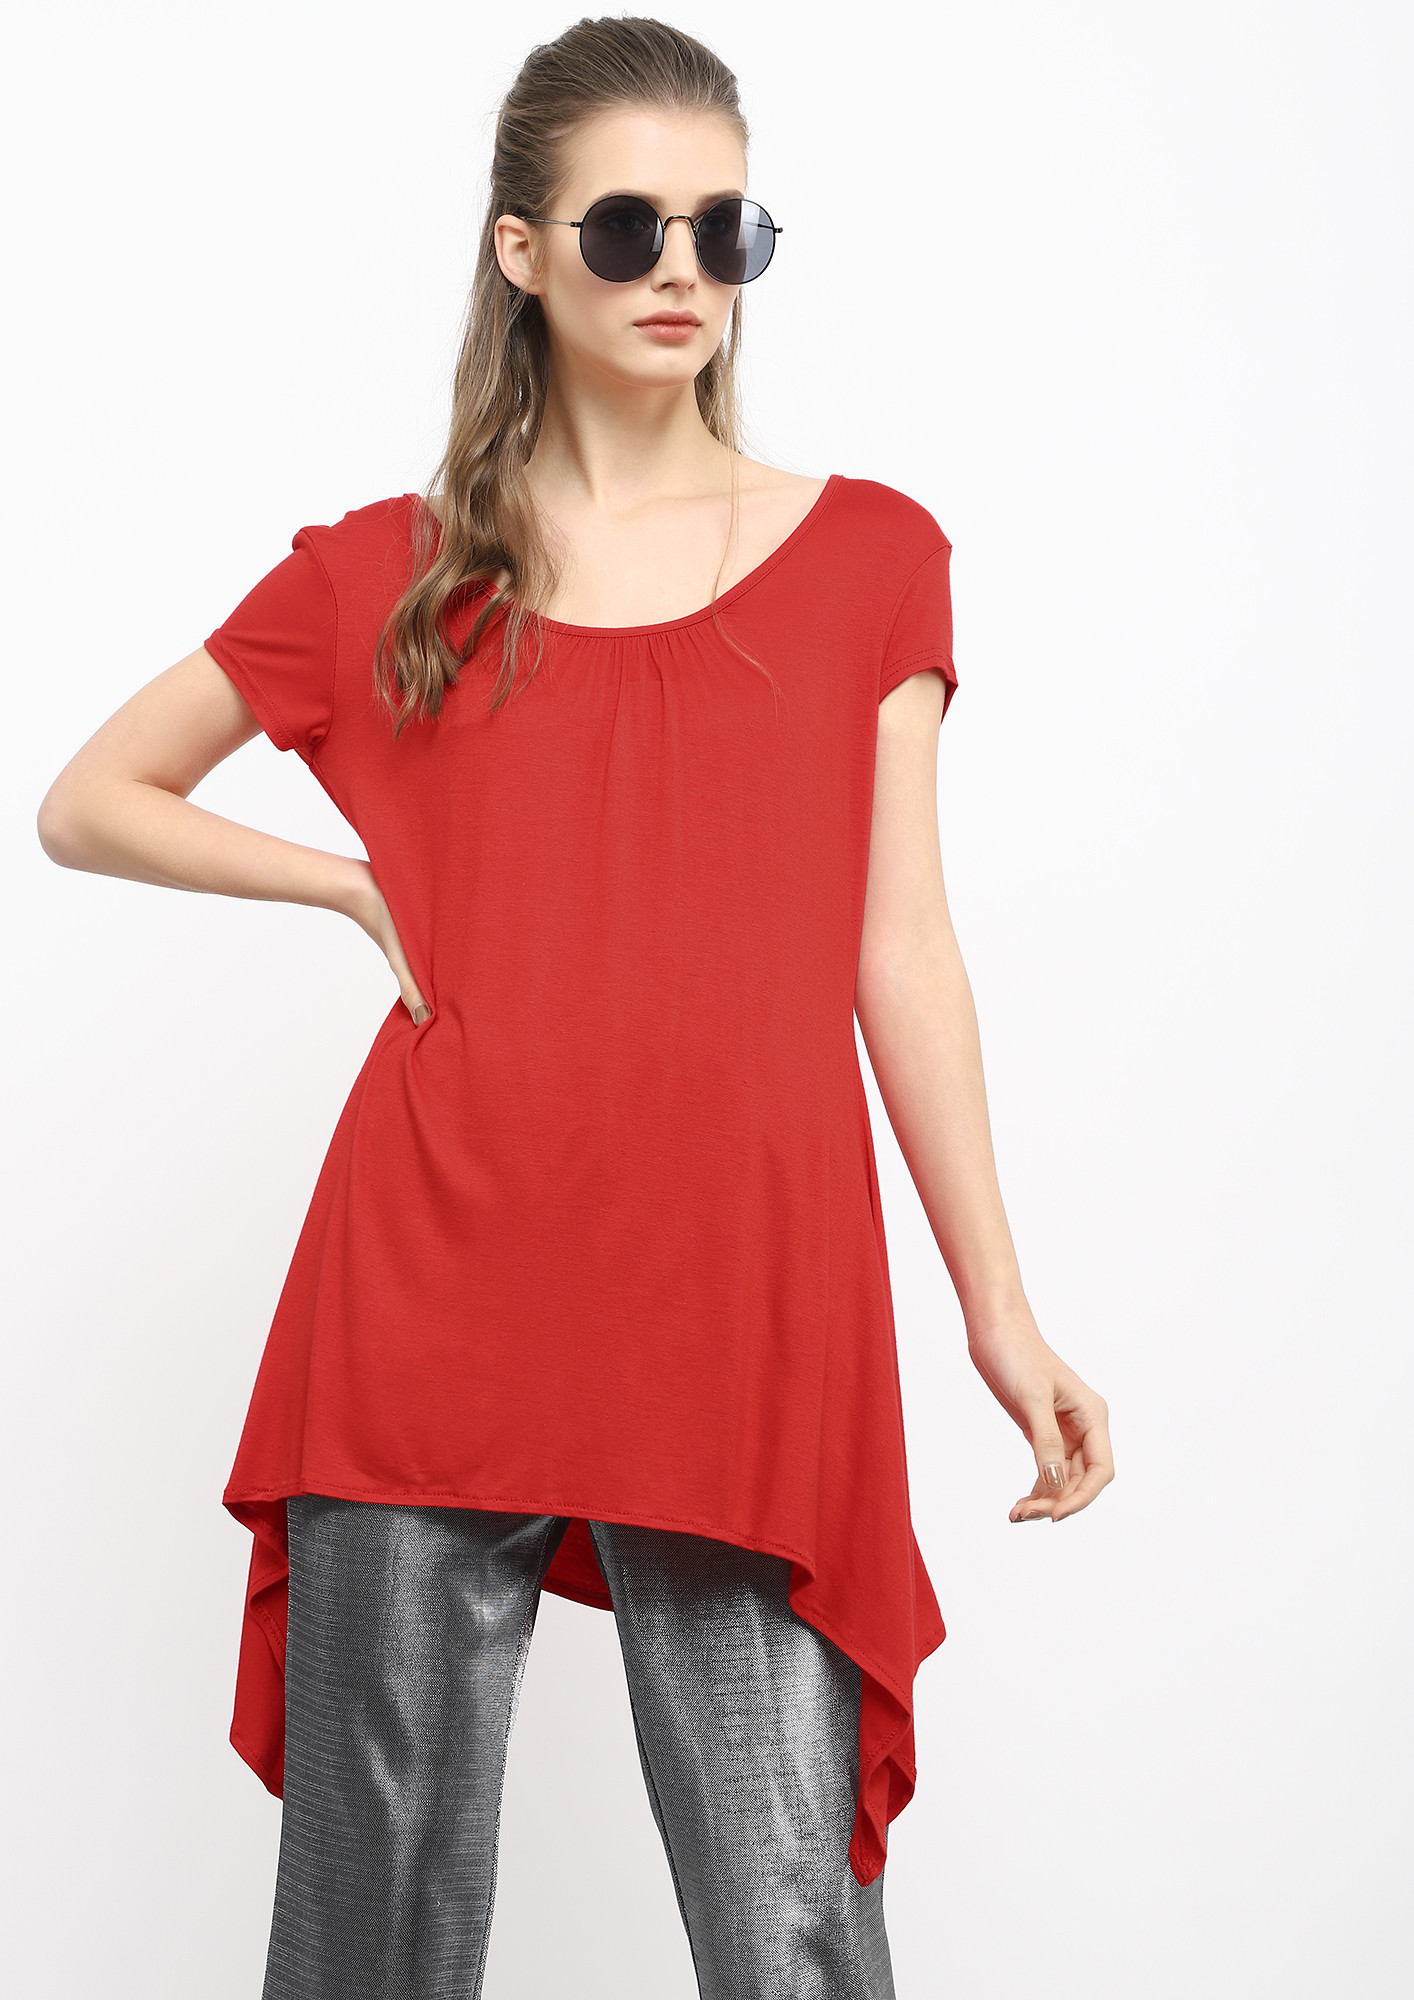 ALONG THE WAVES RED ASYMMETRICAL TUNIC TOP